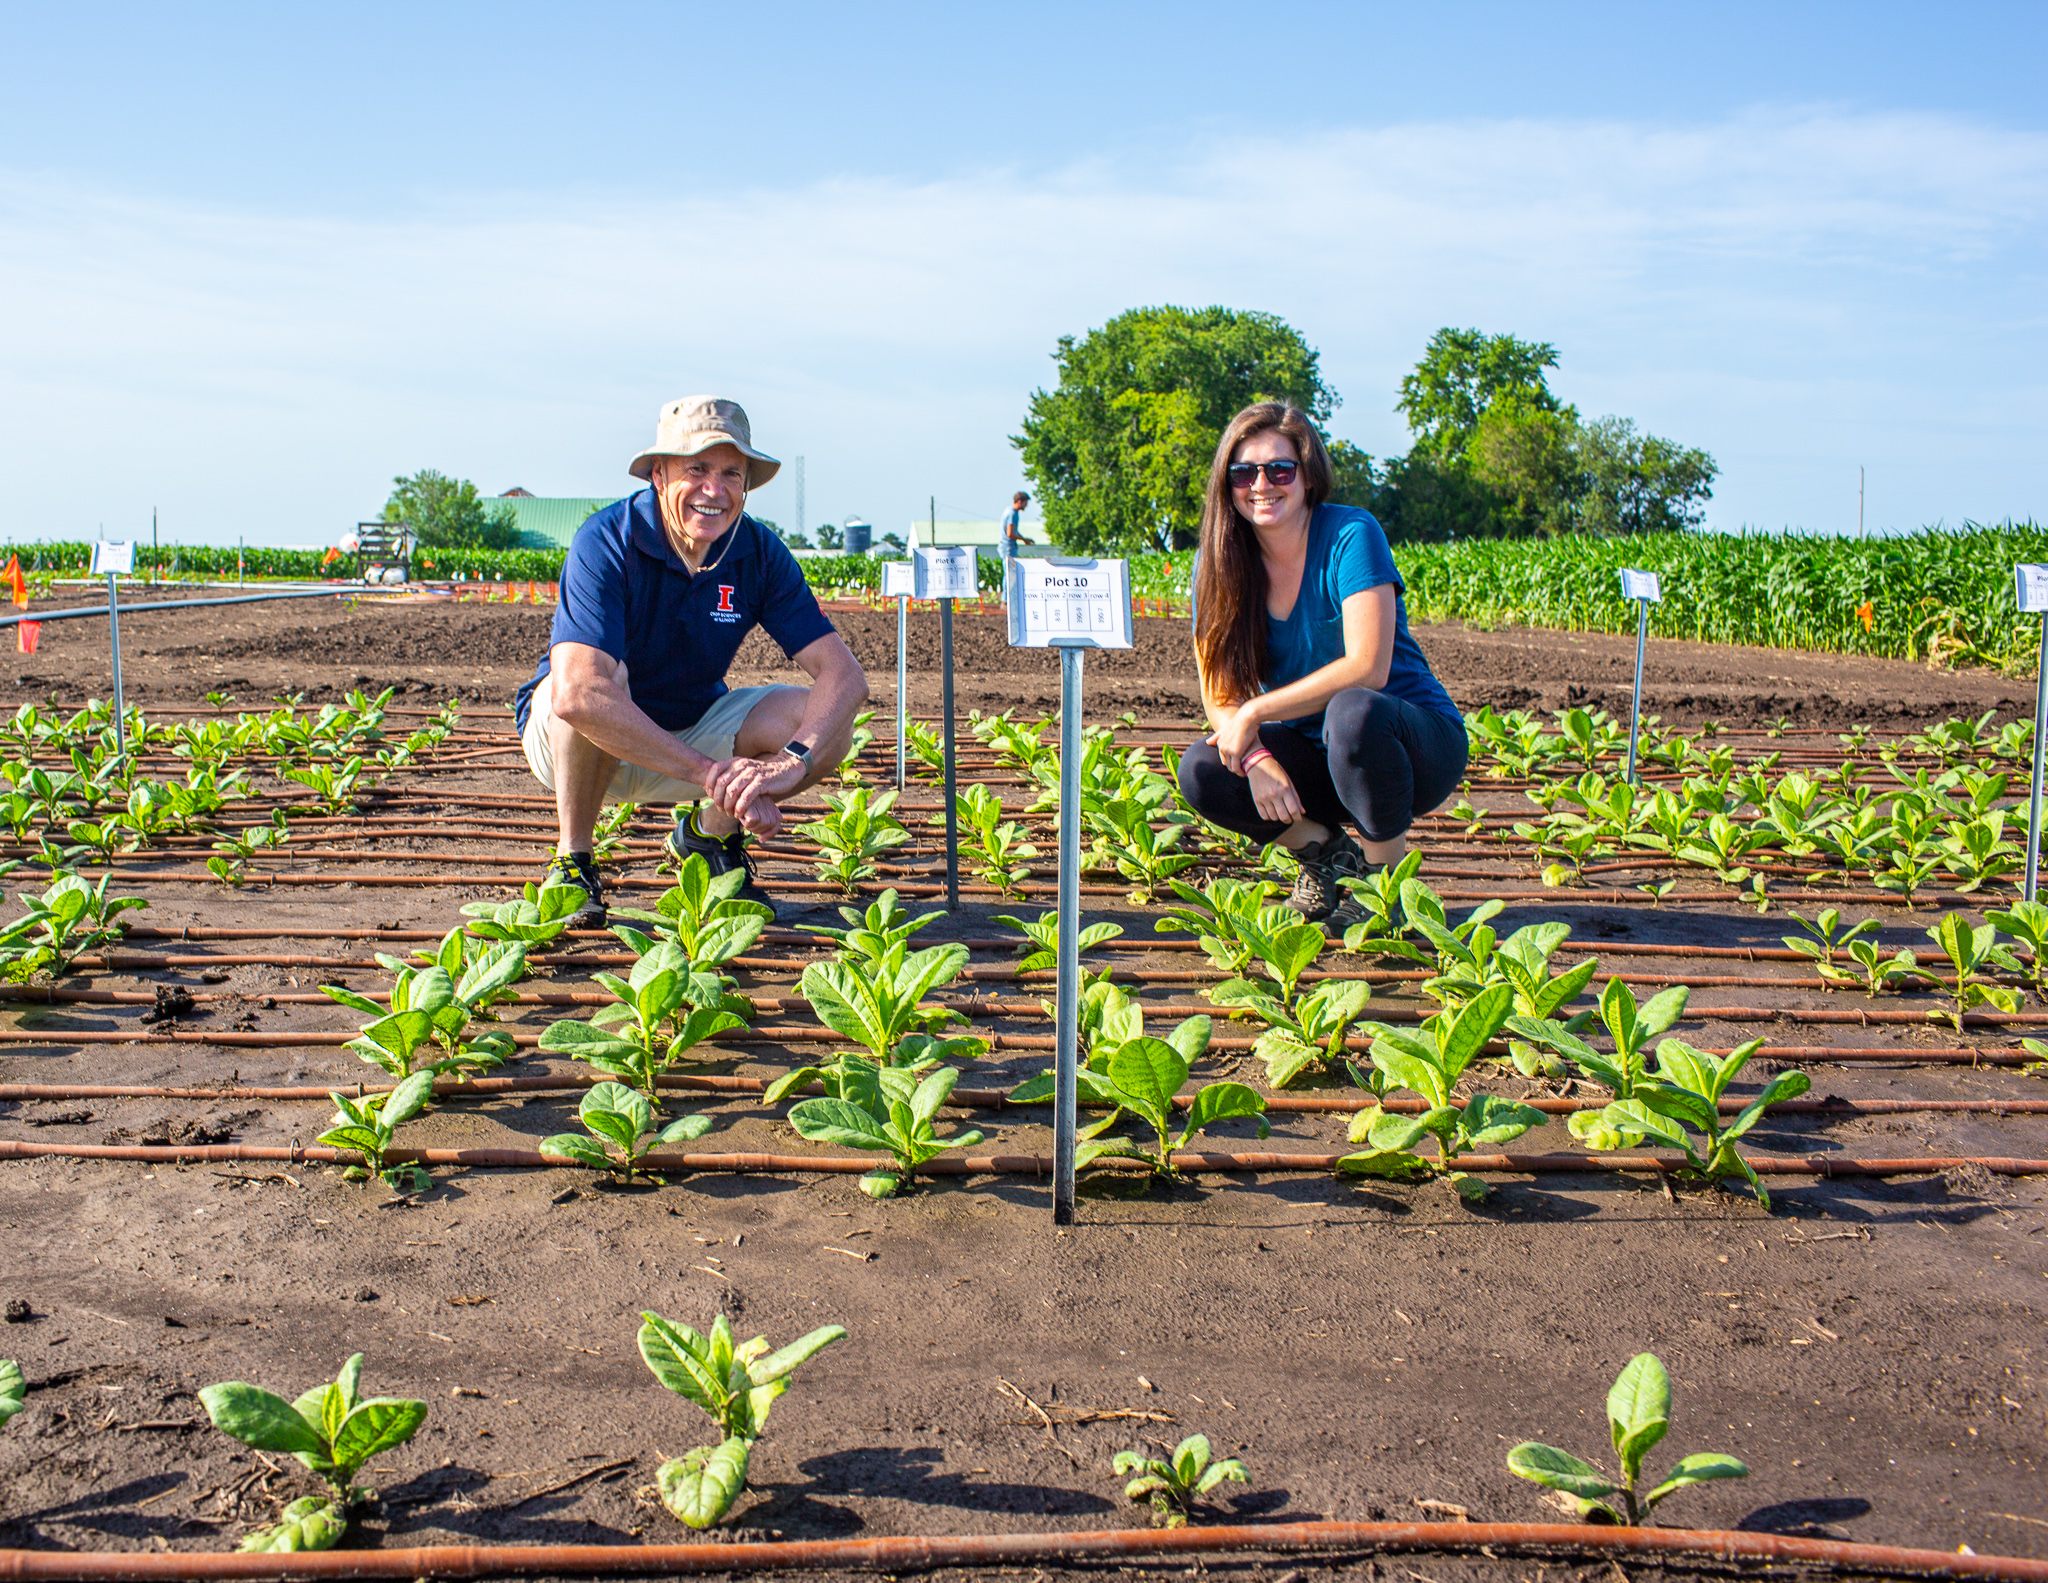 A man and a woman smile at the camera while standing among rows of young, green plants.